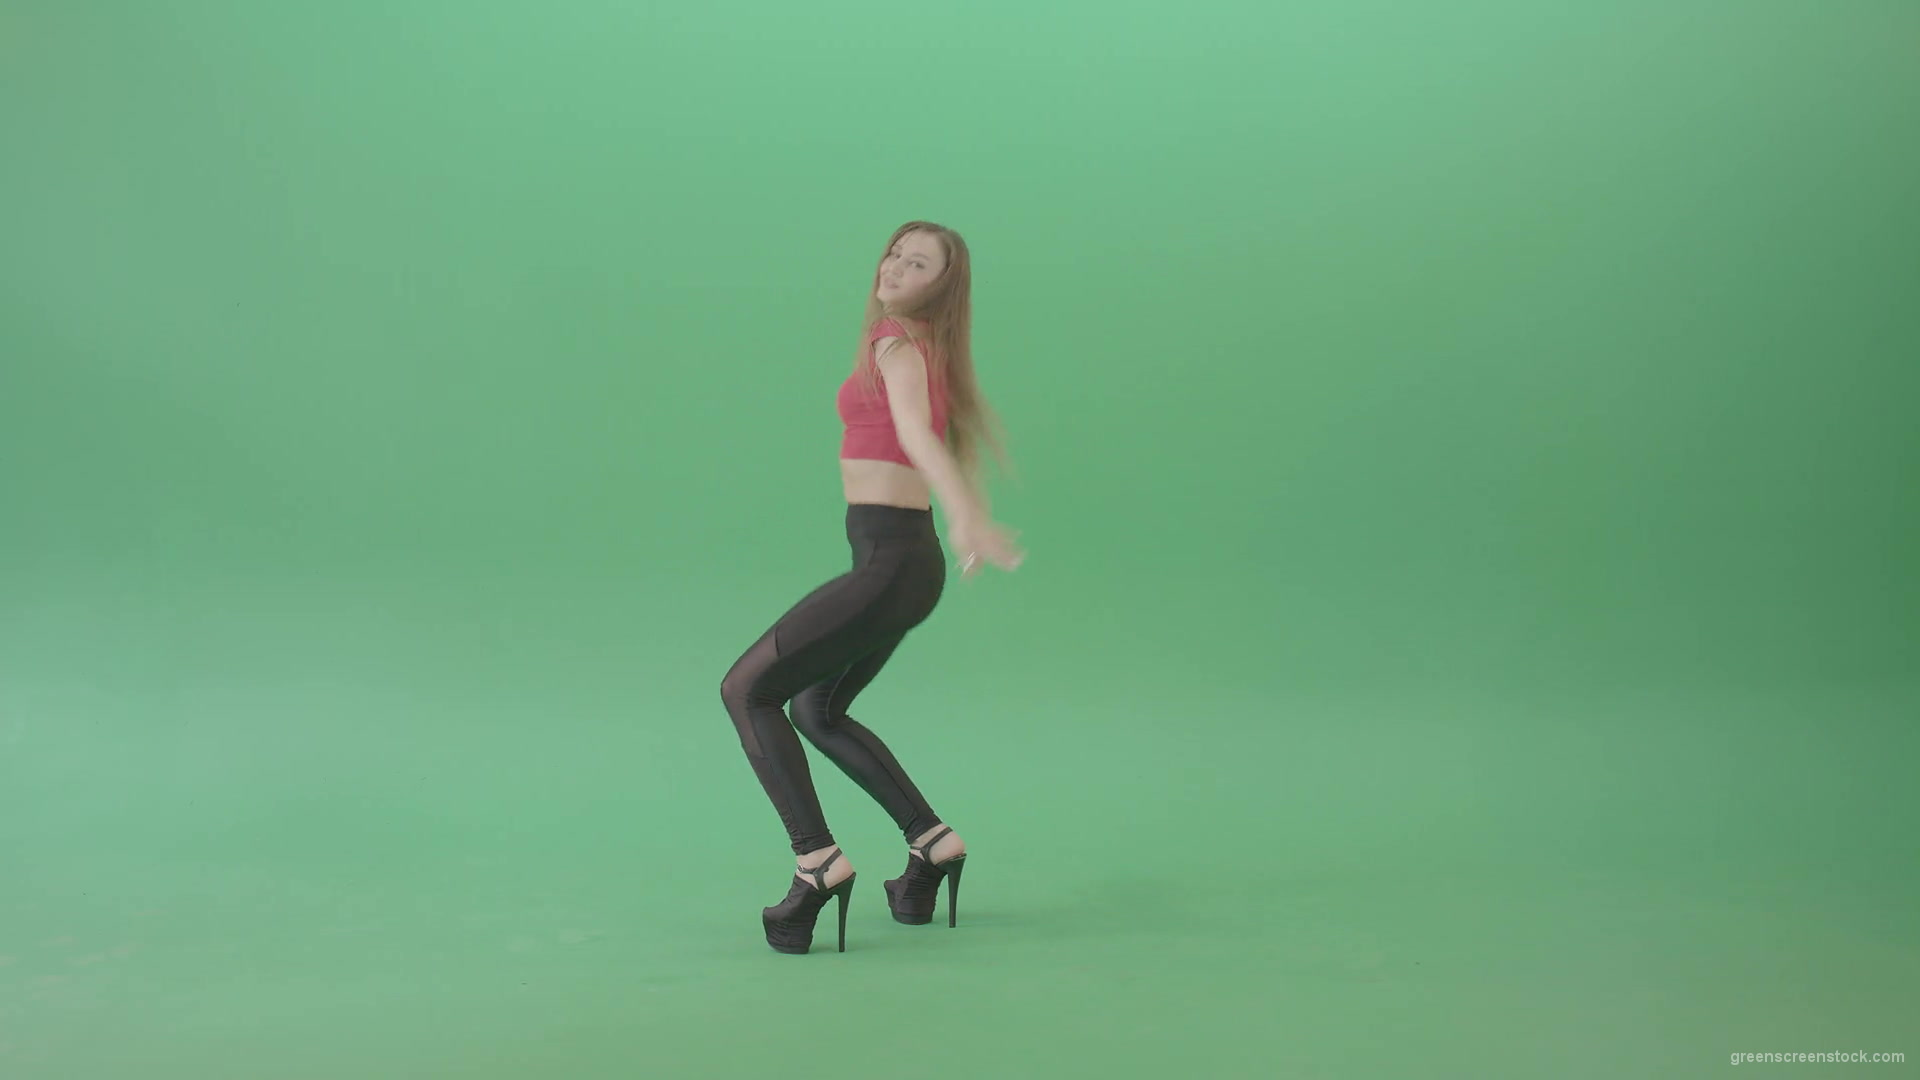 Young-woman-making-squat-on-green-screen-dancing-sexy-moves-4K-Video-Footage-1920_007 Green Screen Stock